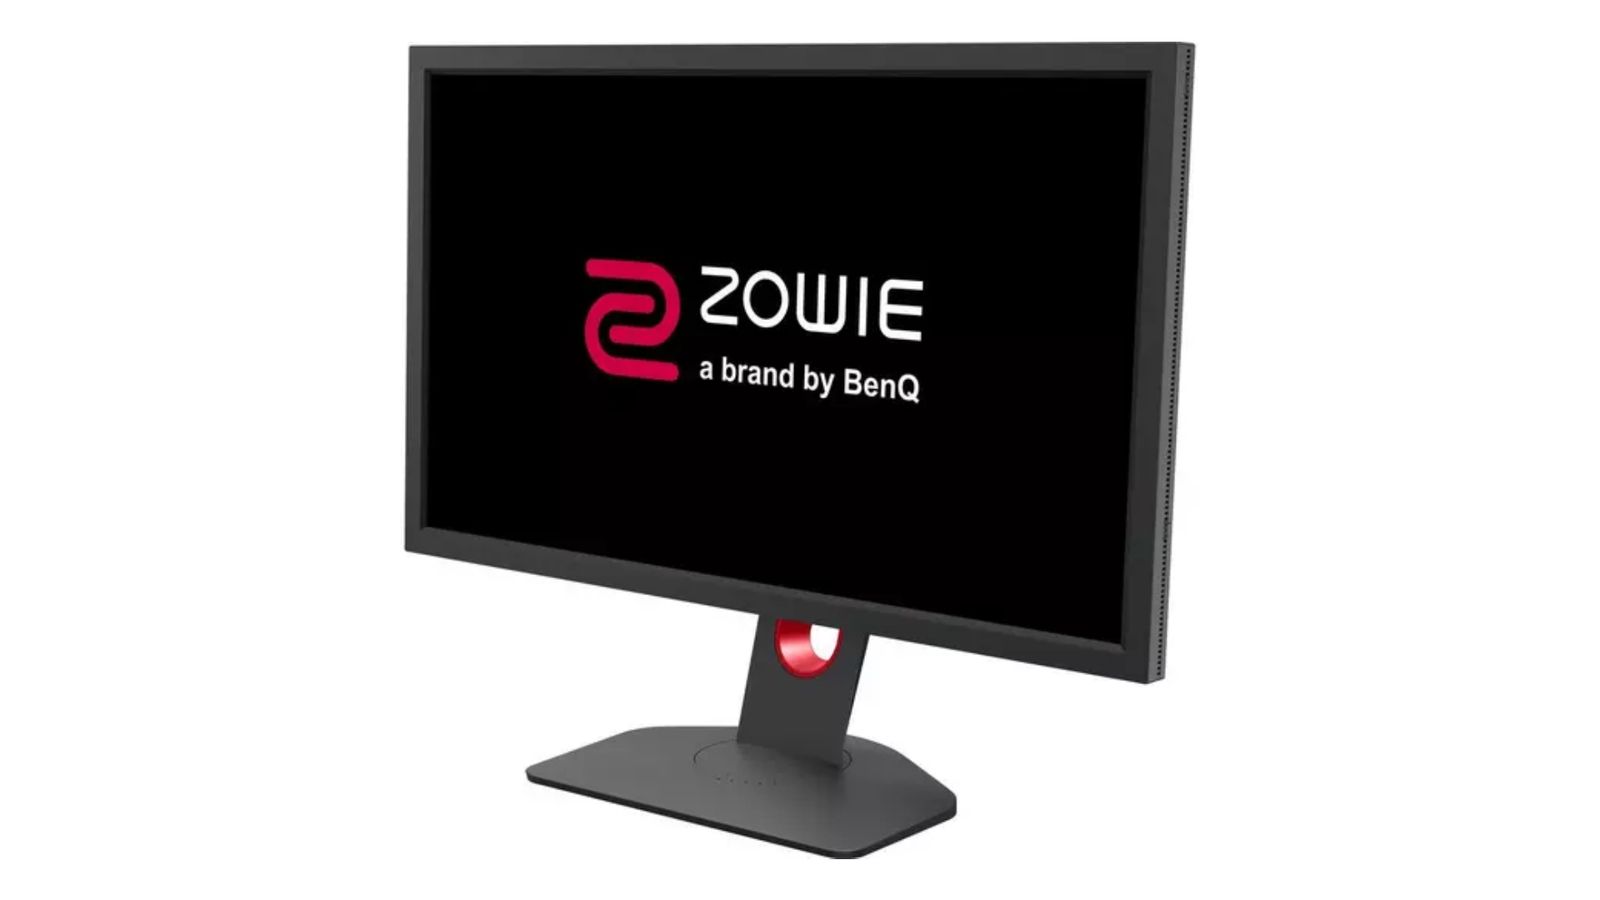 BenQ Zowie XL2411K product image of a dark grey monitor featuring red details.